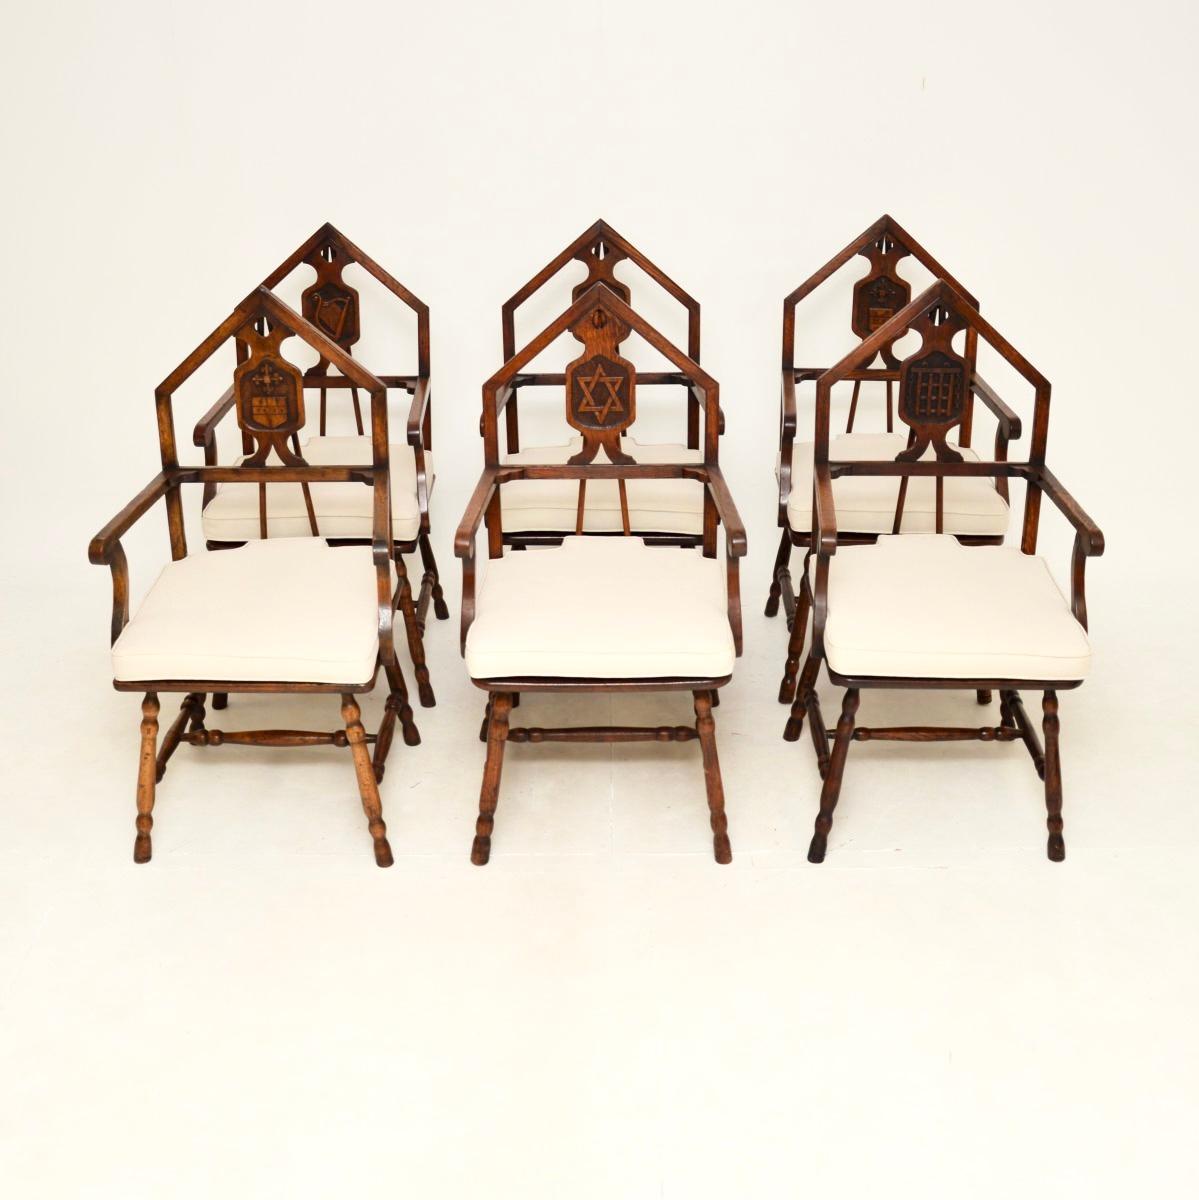 A superb set of six antique Victorian oak masonic dining chairs. They were made in England, and date from around the 1880-1900 period.

They are of superb quality and have an extremely interesting design. The back rests are arched in the typical